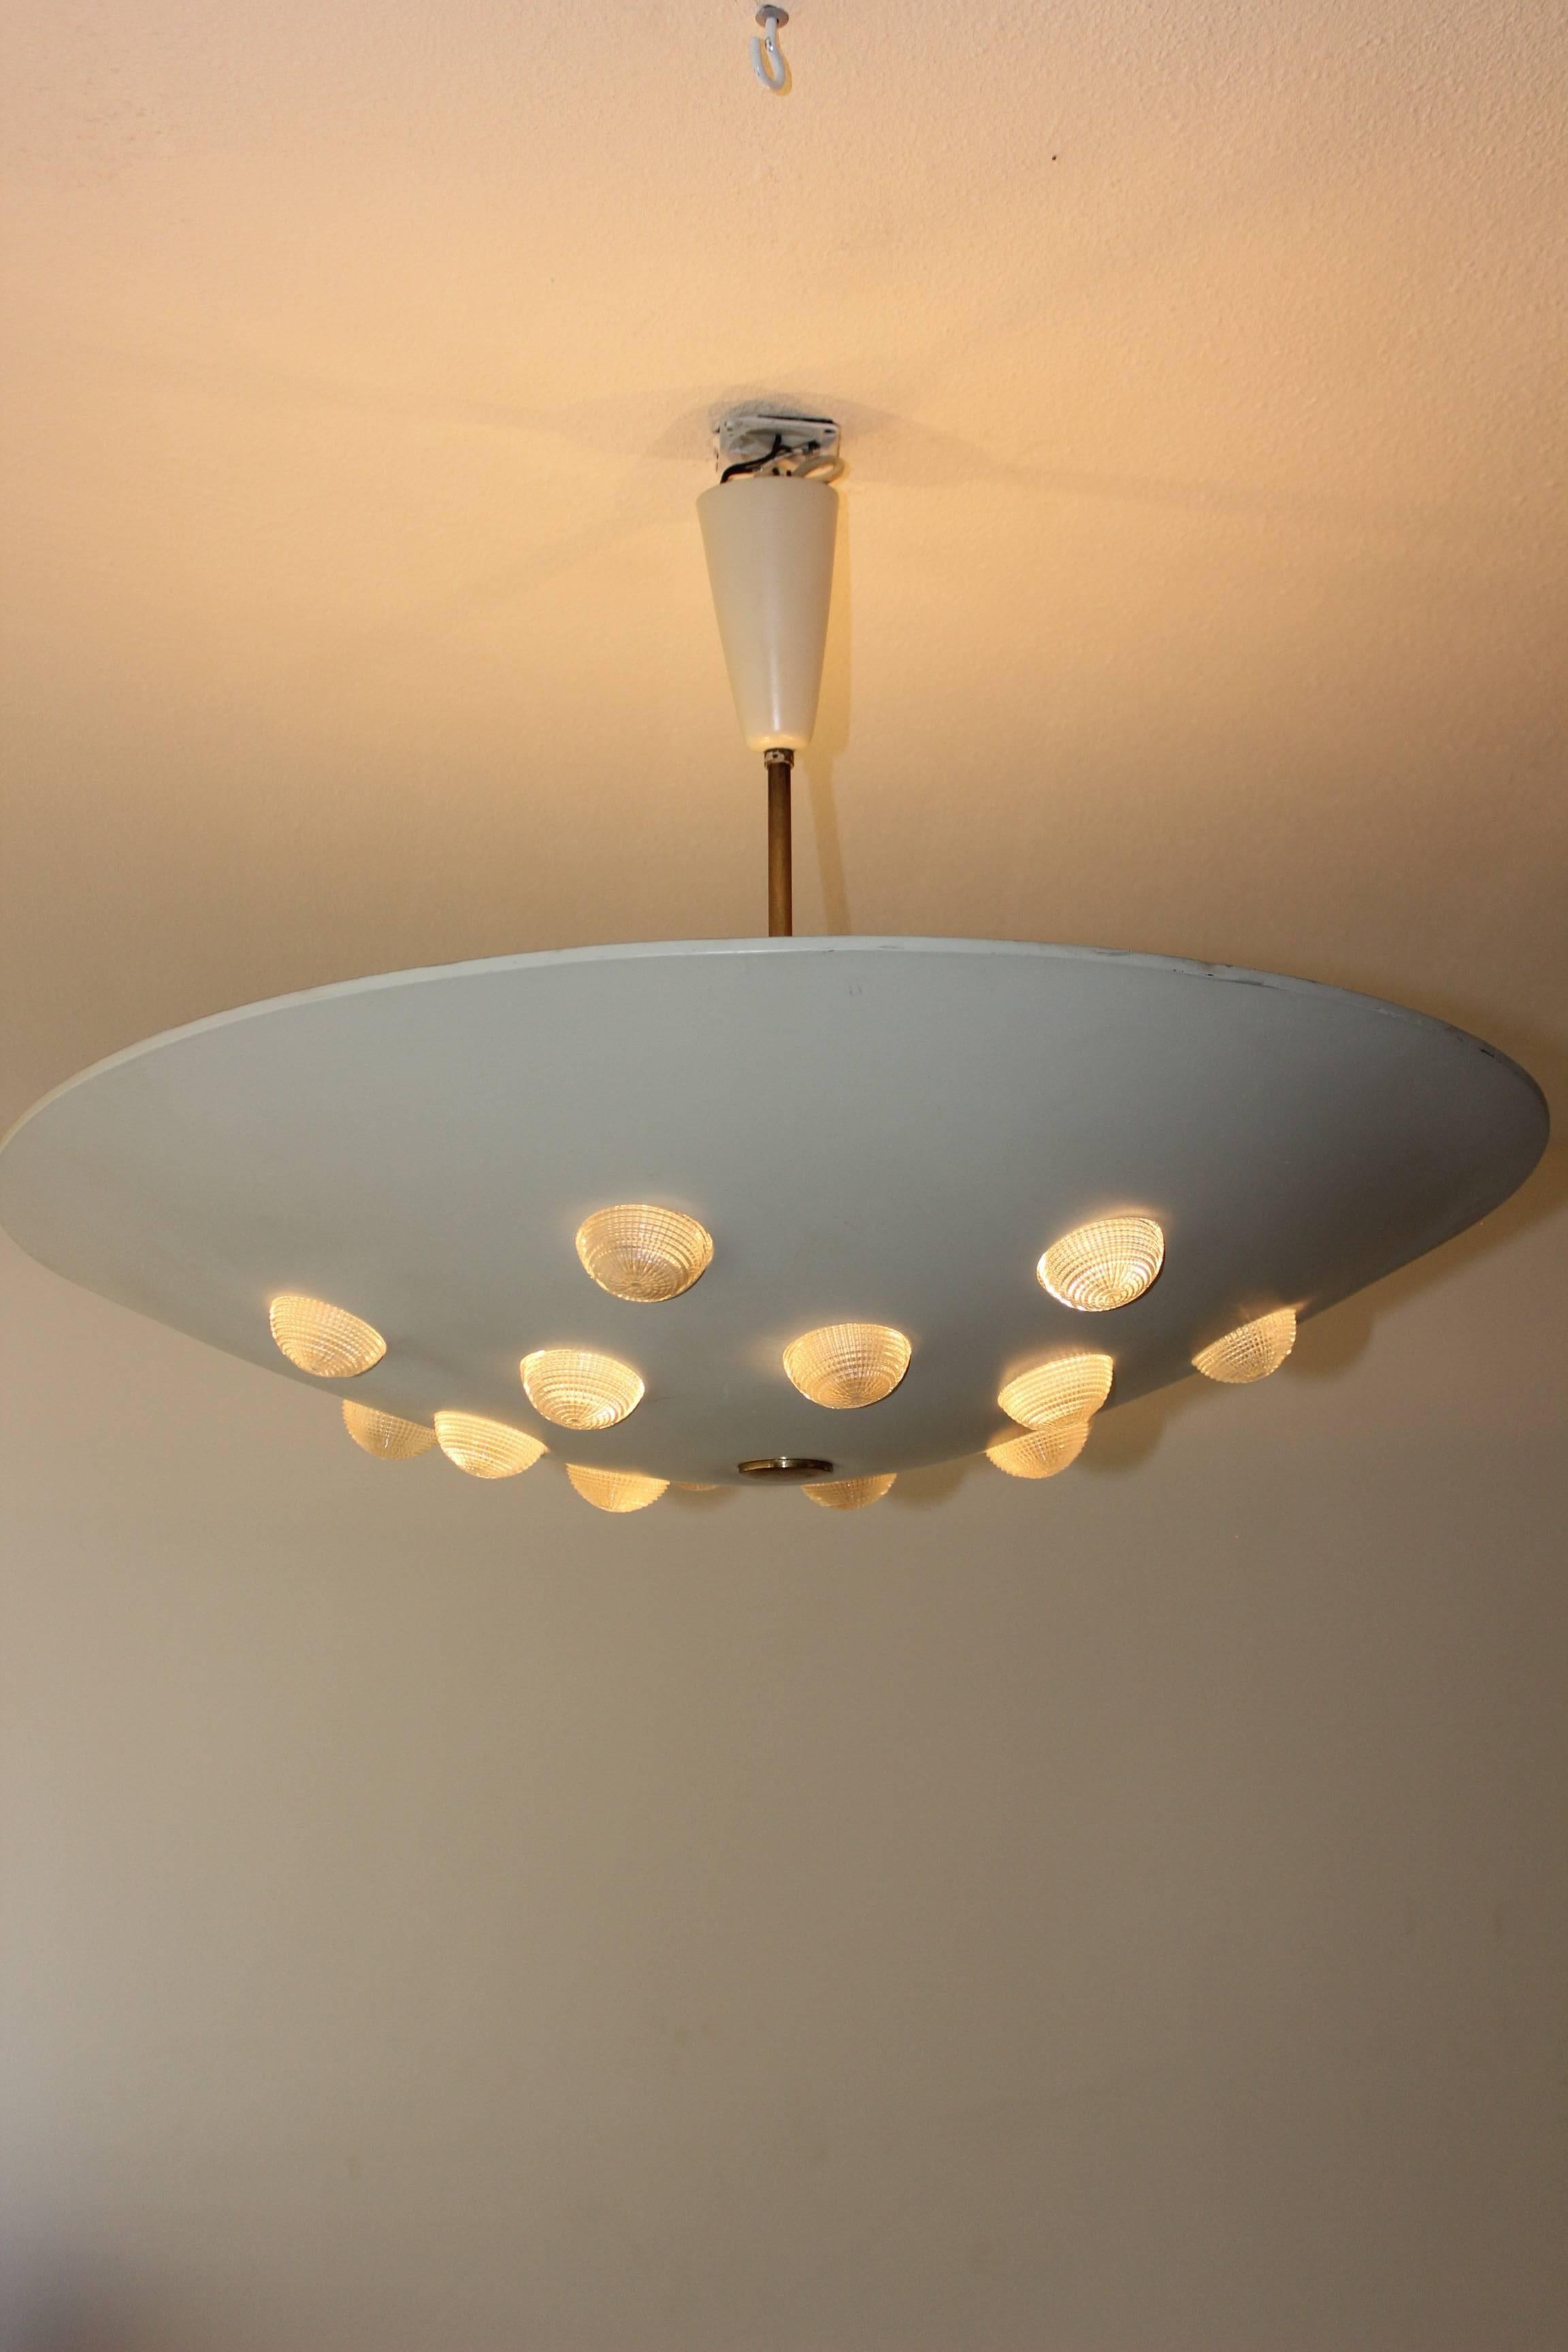 Mid-Century Modern Large Chandelier by Stilnovo Italy, circa 1950-1960 For Sale